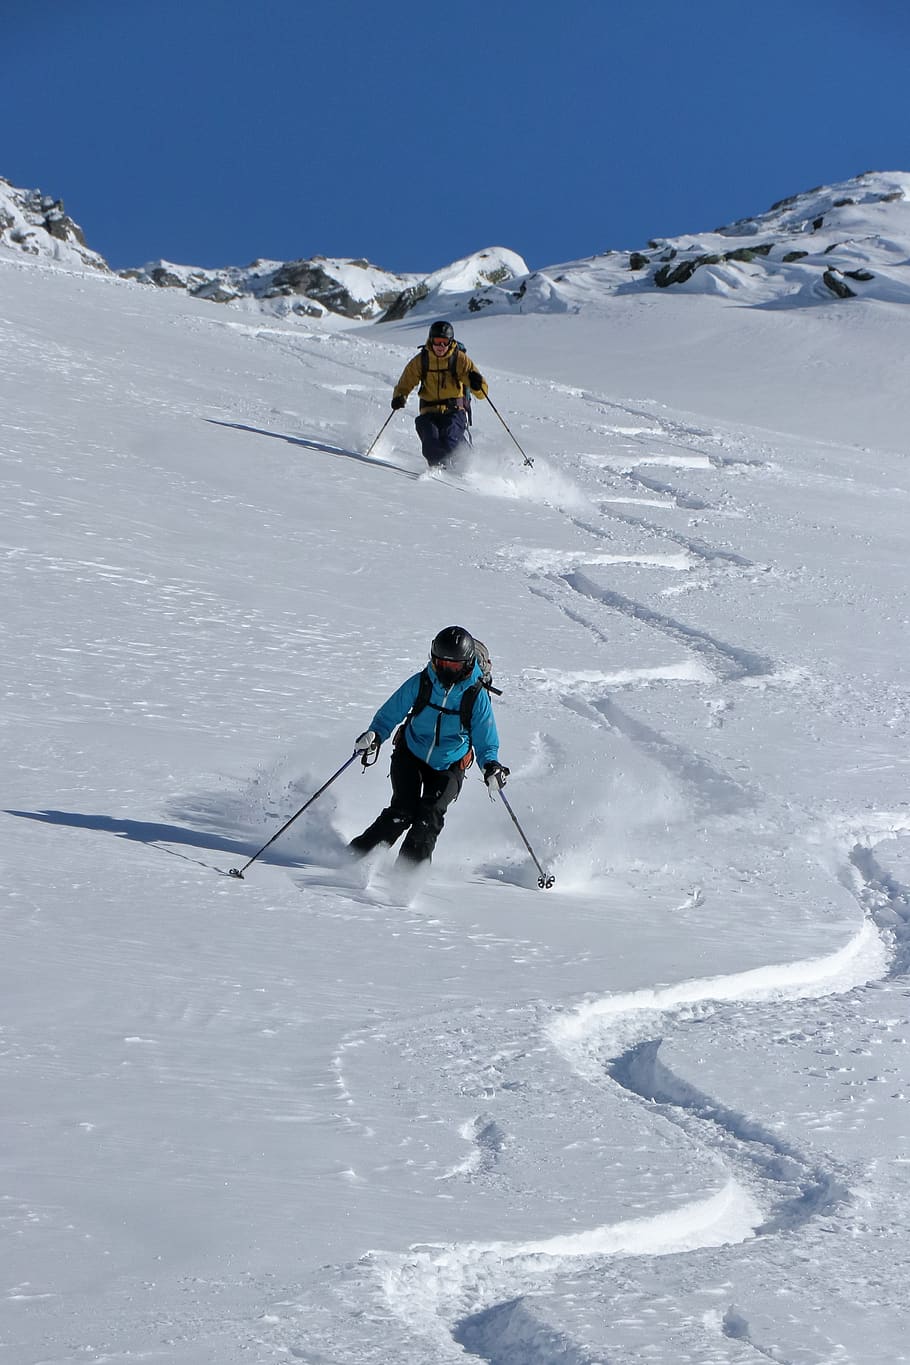 ski, snow, winter, deep snow, departure, backcountry skiiing, cold temperature, mountain, leisure activity, sport